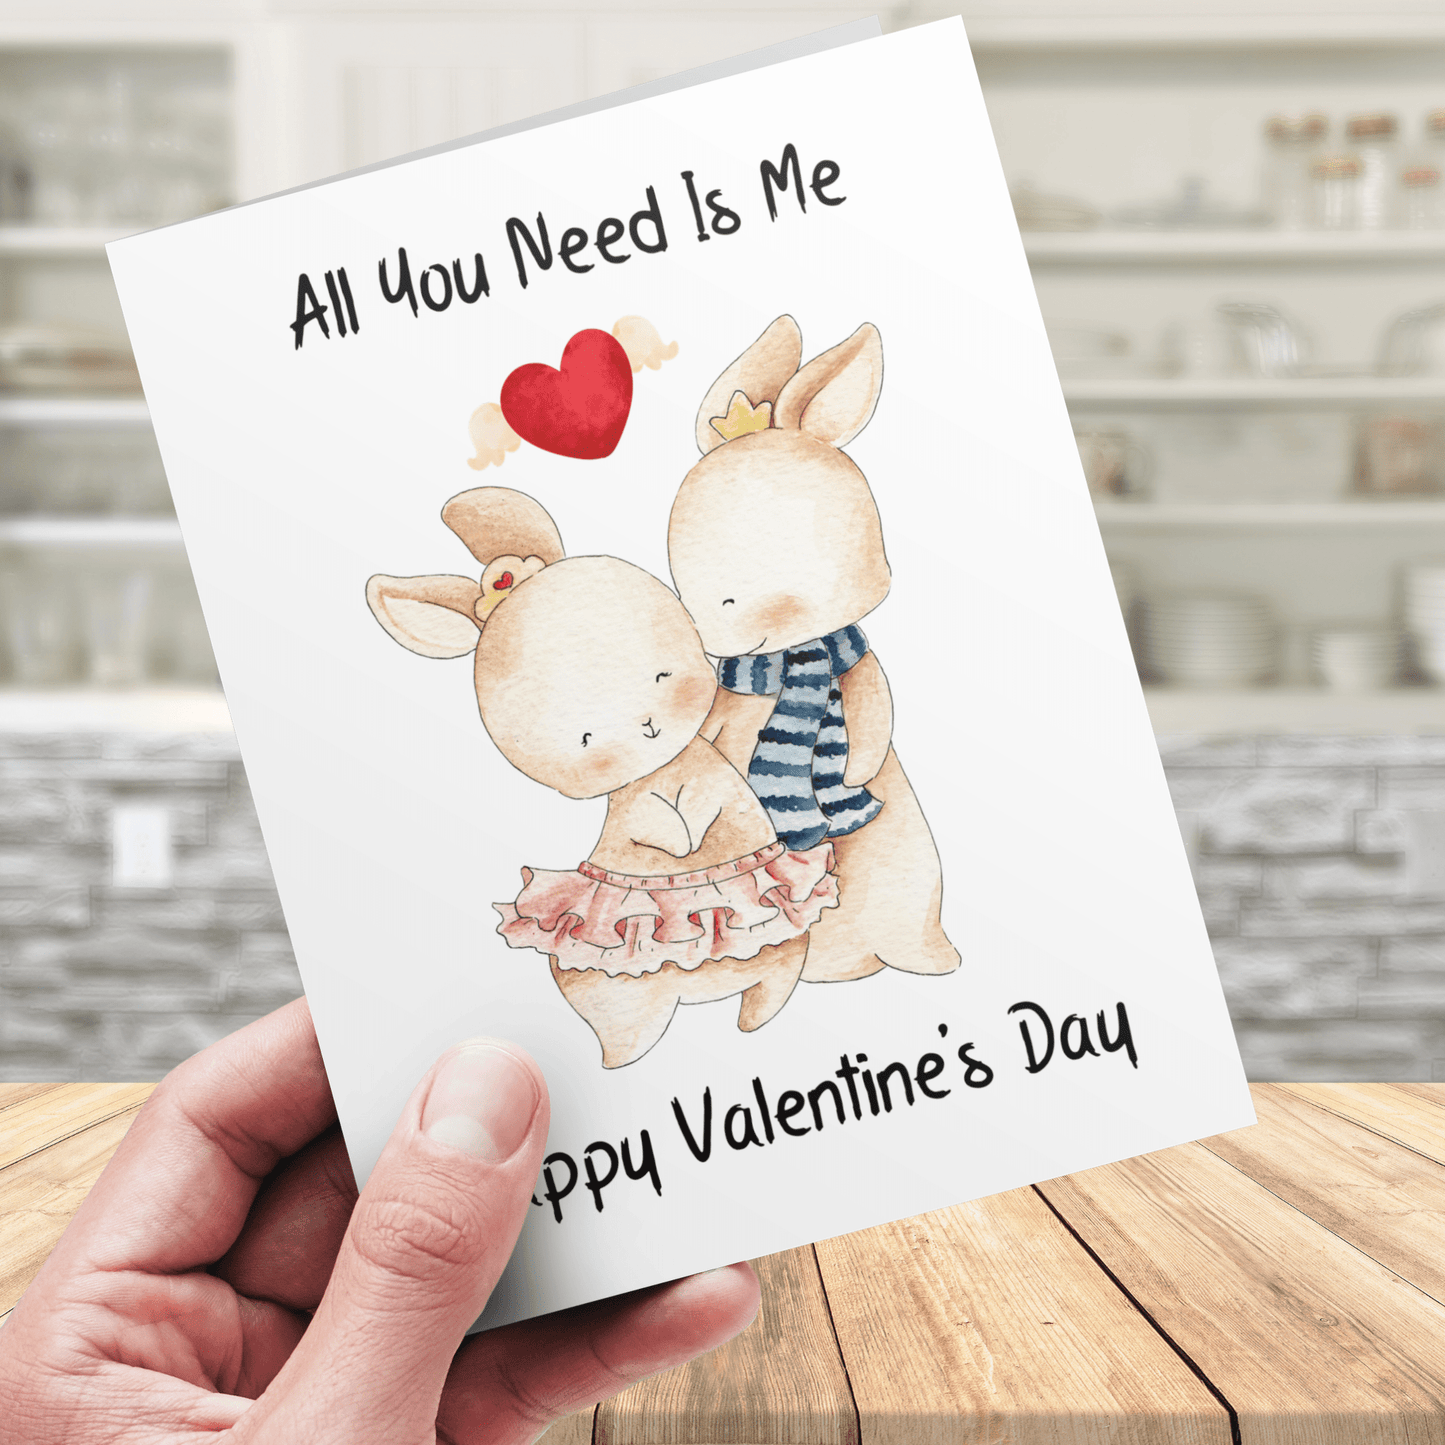 Couple Digital Valentine's Day Greeting Card: All You Need Is Me...